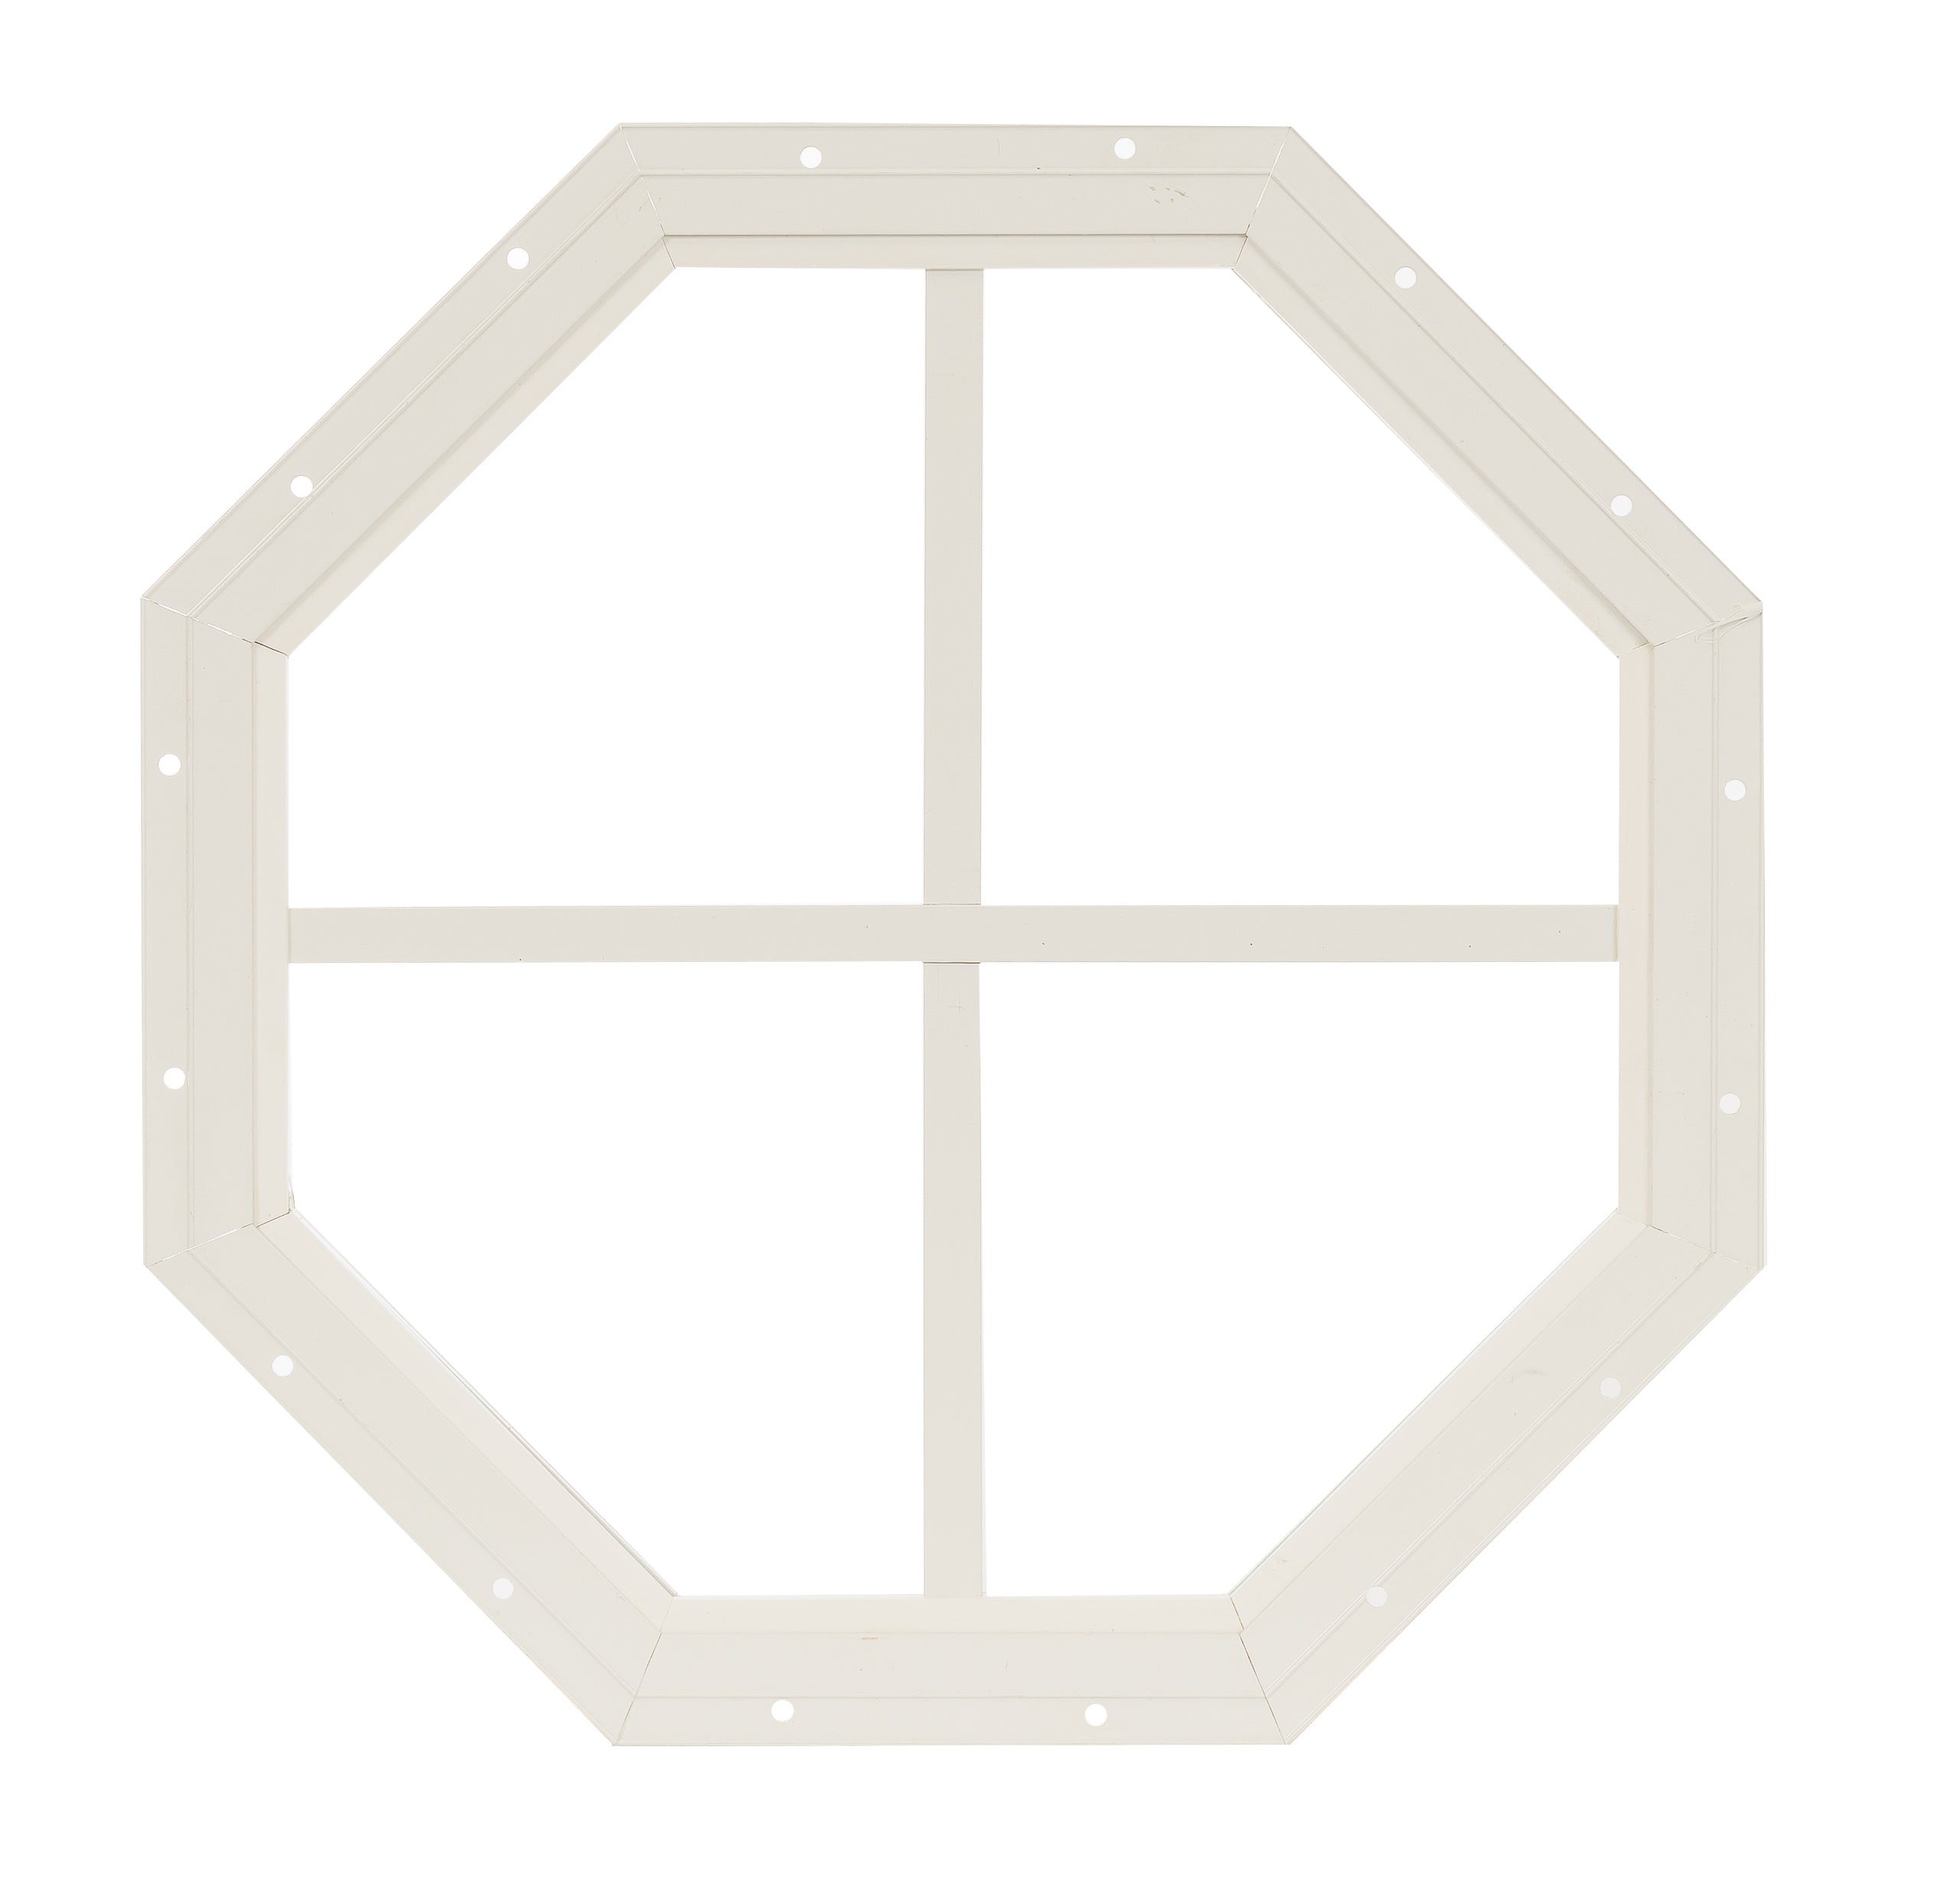 14" Octagon Gable Flush Mount White Window for Sheds, Playhouses, and MORE